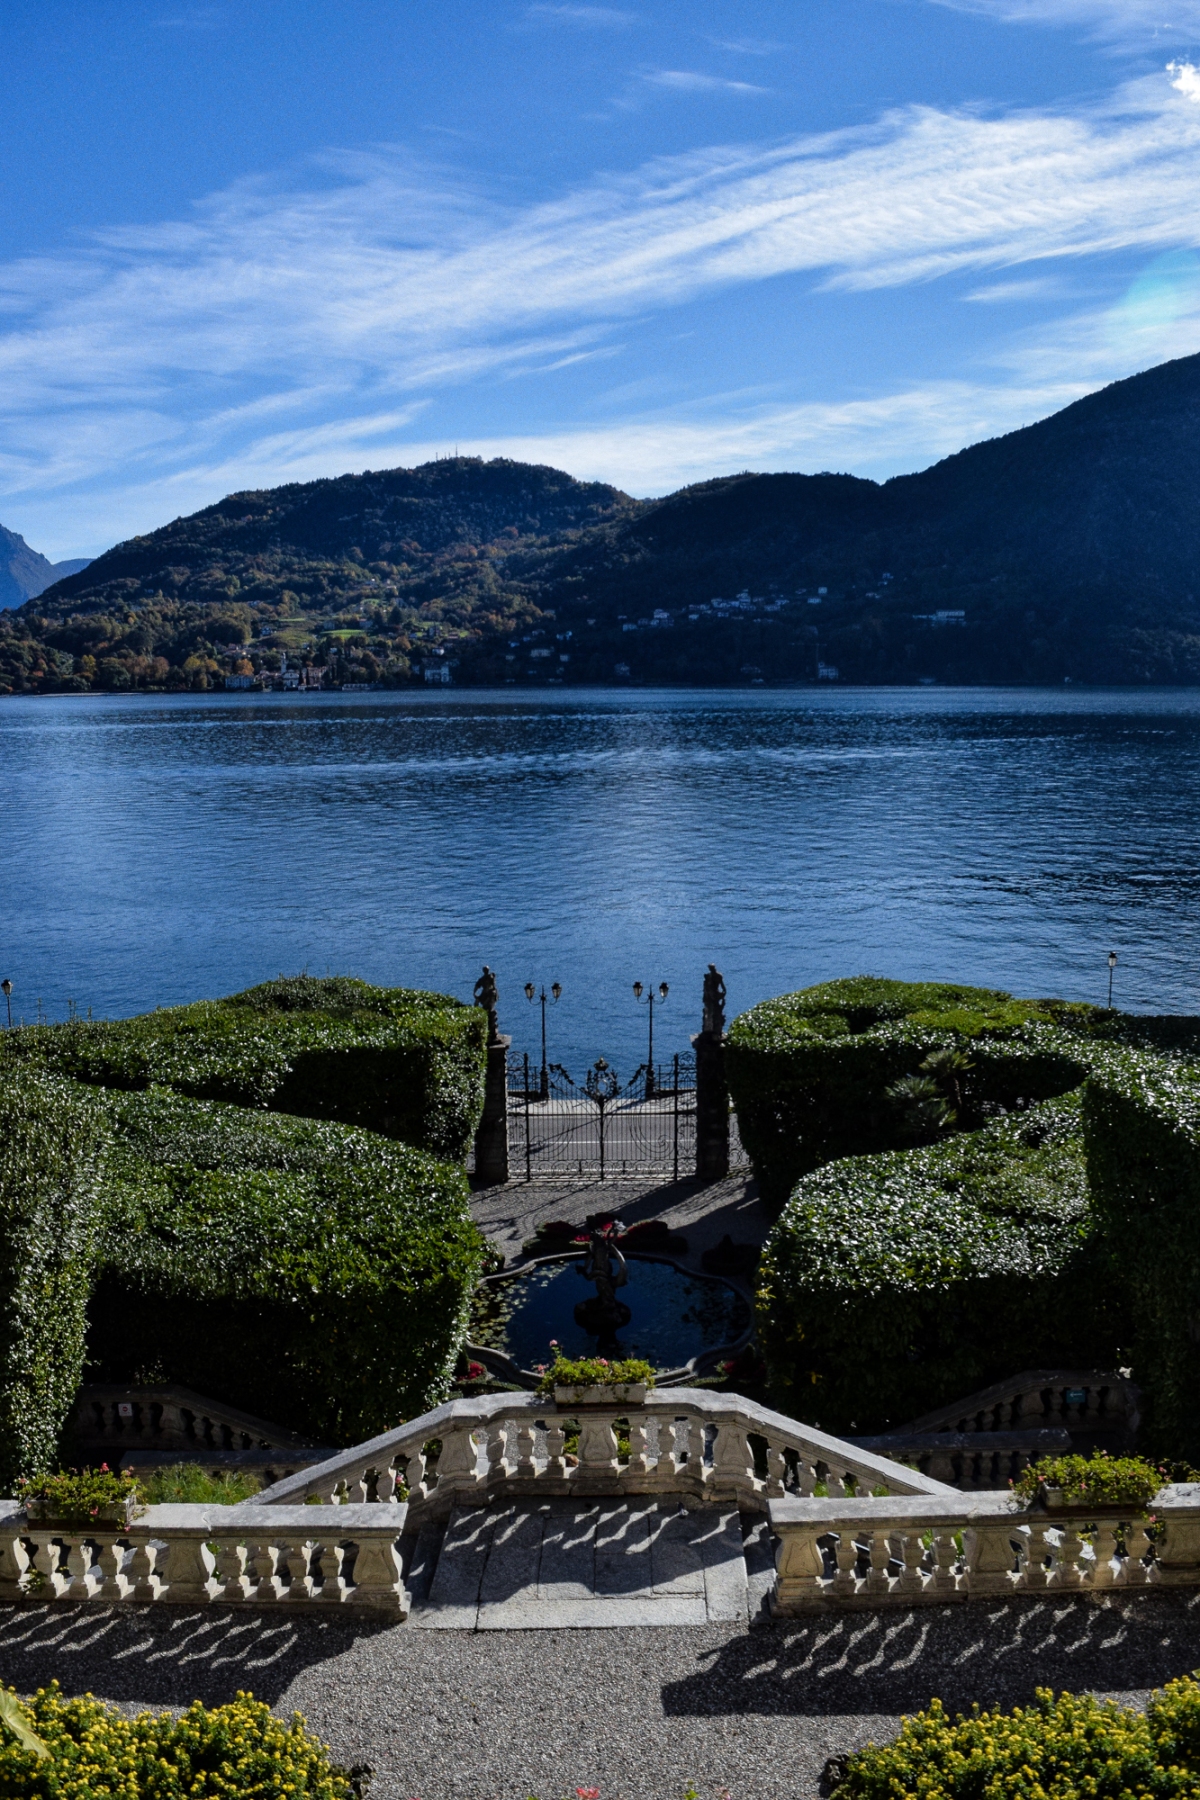 Food & Travel Guide to Lake Como, Italy – What to See, Eat & Do